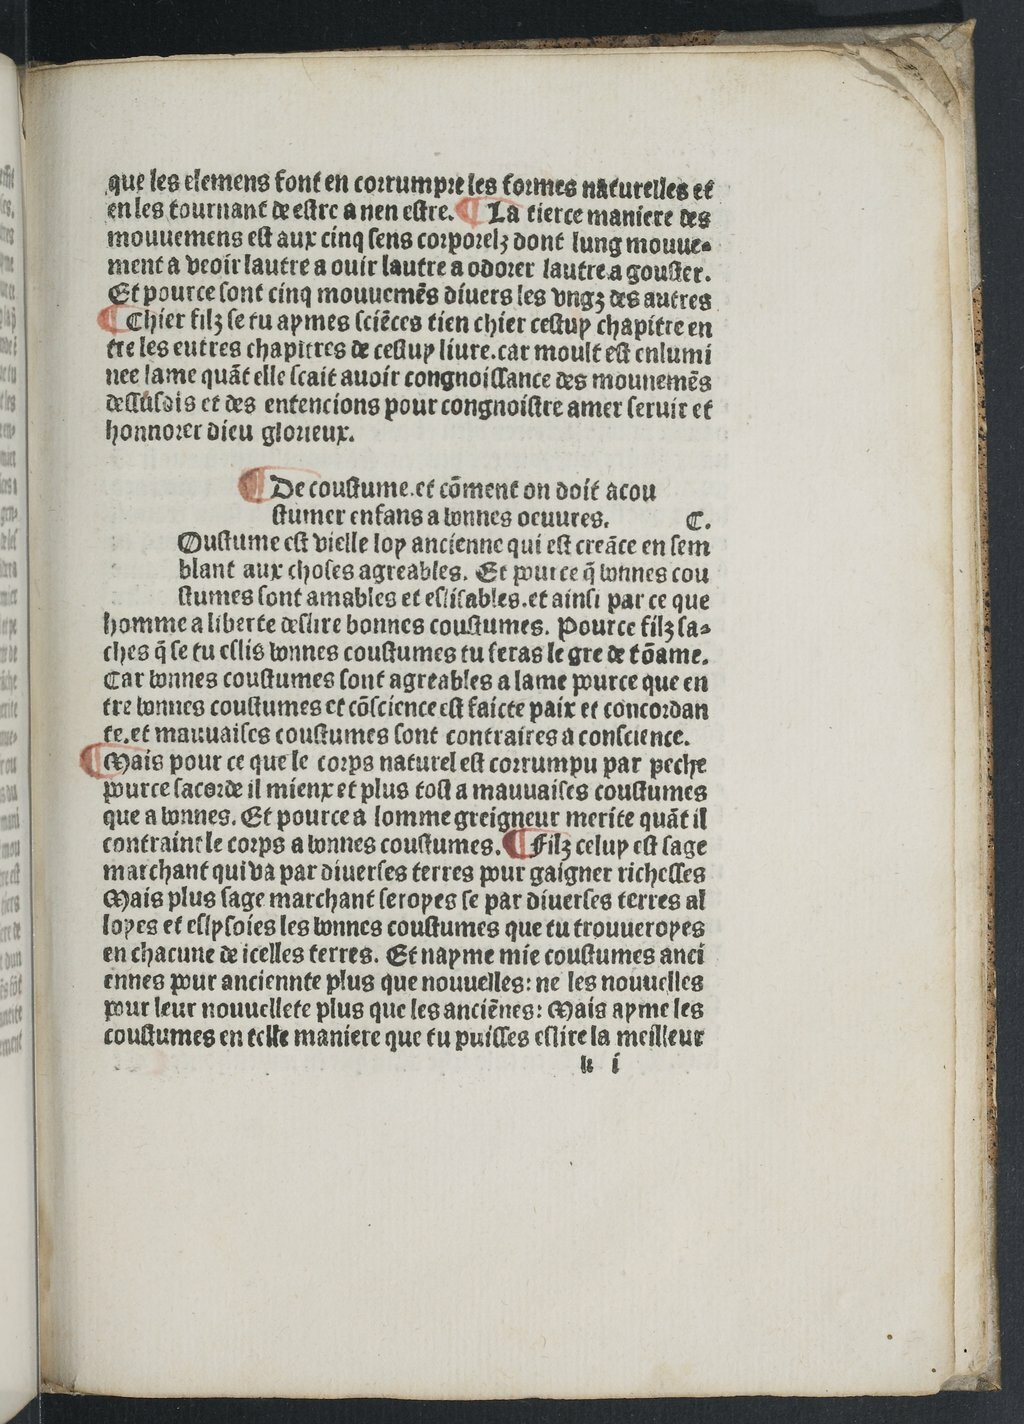 1482 [Antoine Caillaut] Trésor des humains BnF_Page_147.jpg